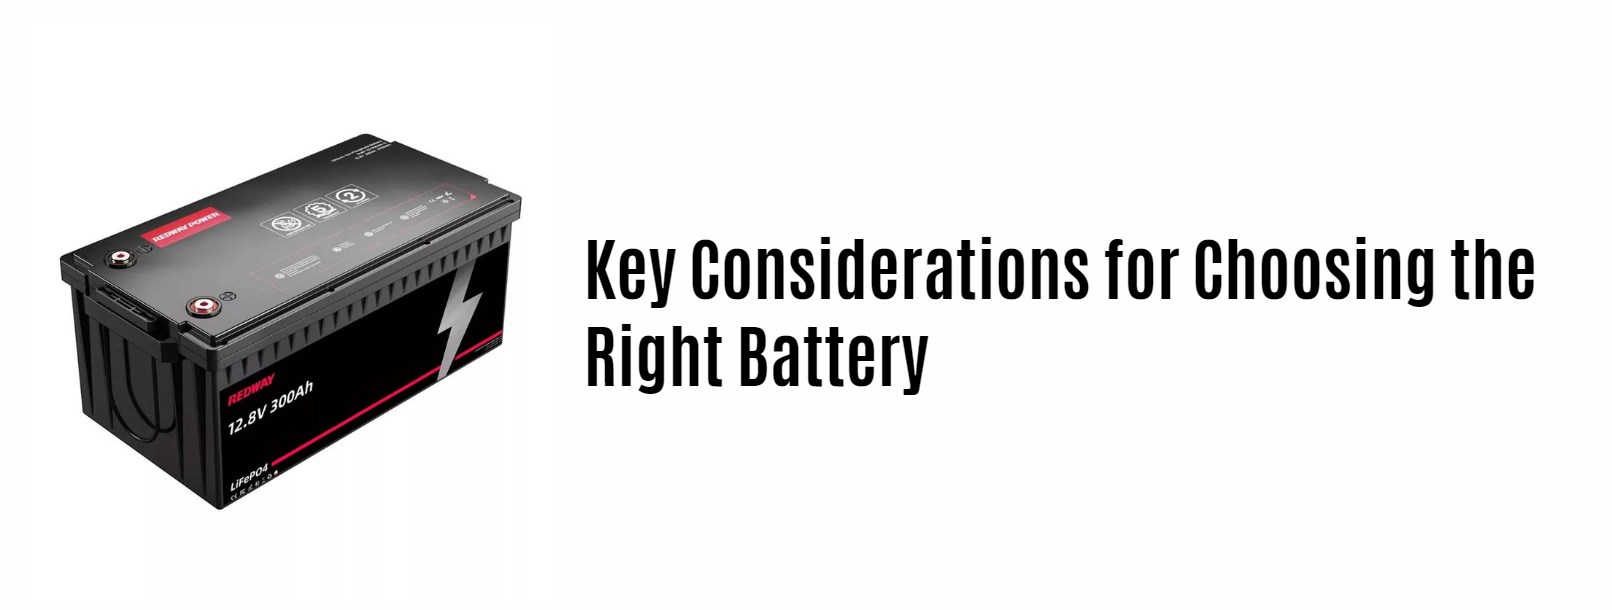 Key Considerations for Choosing the Right Battery. 12v 300ah lithium battery for marine boat